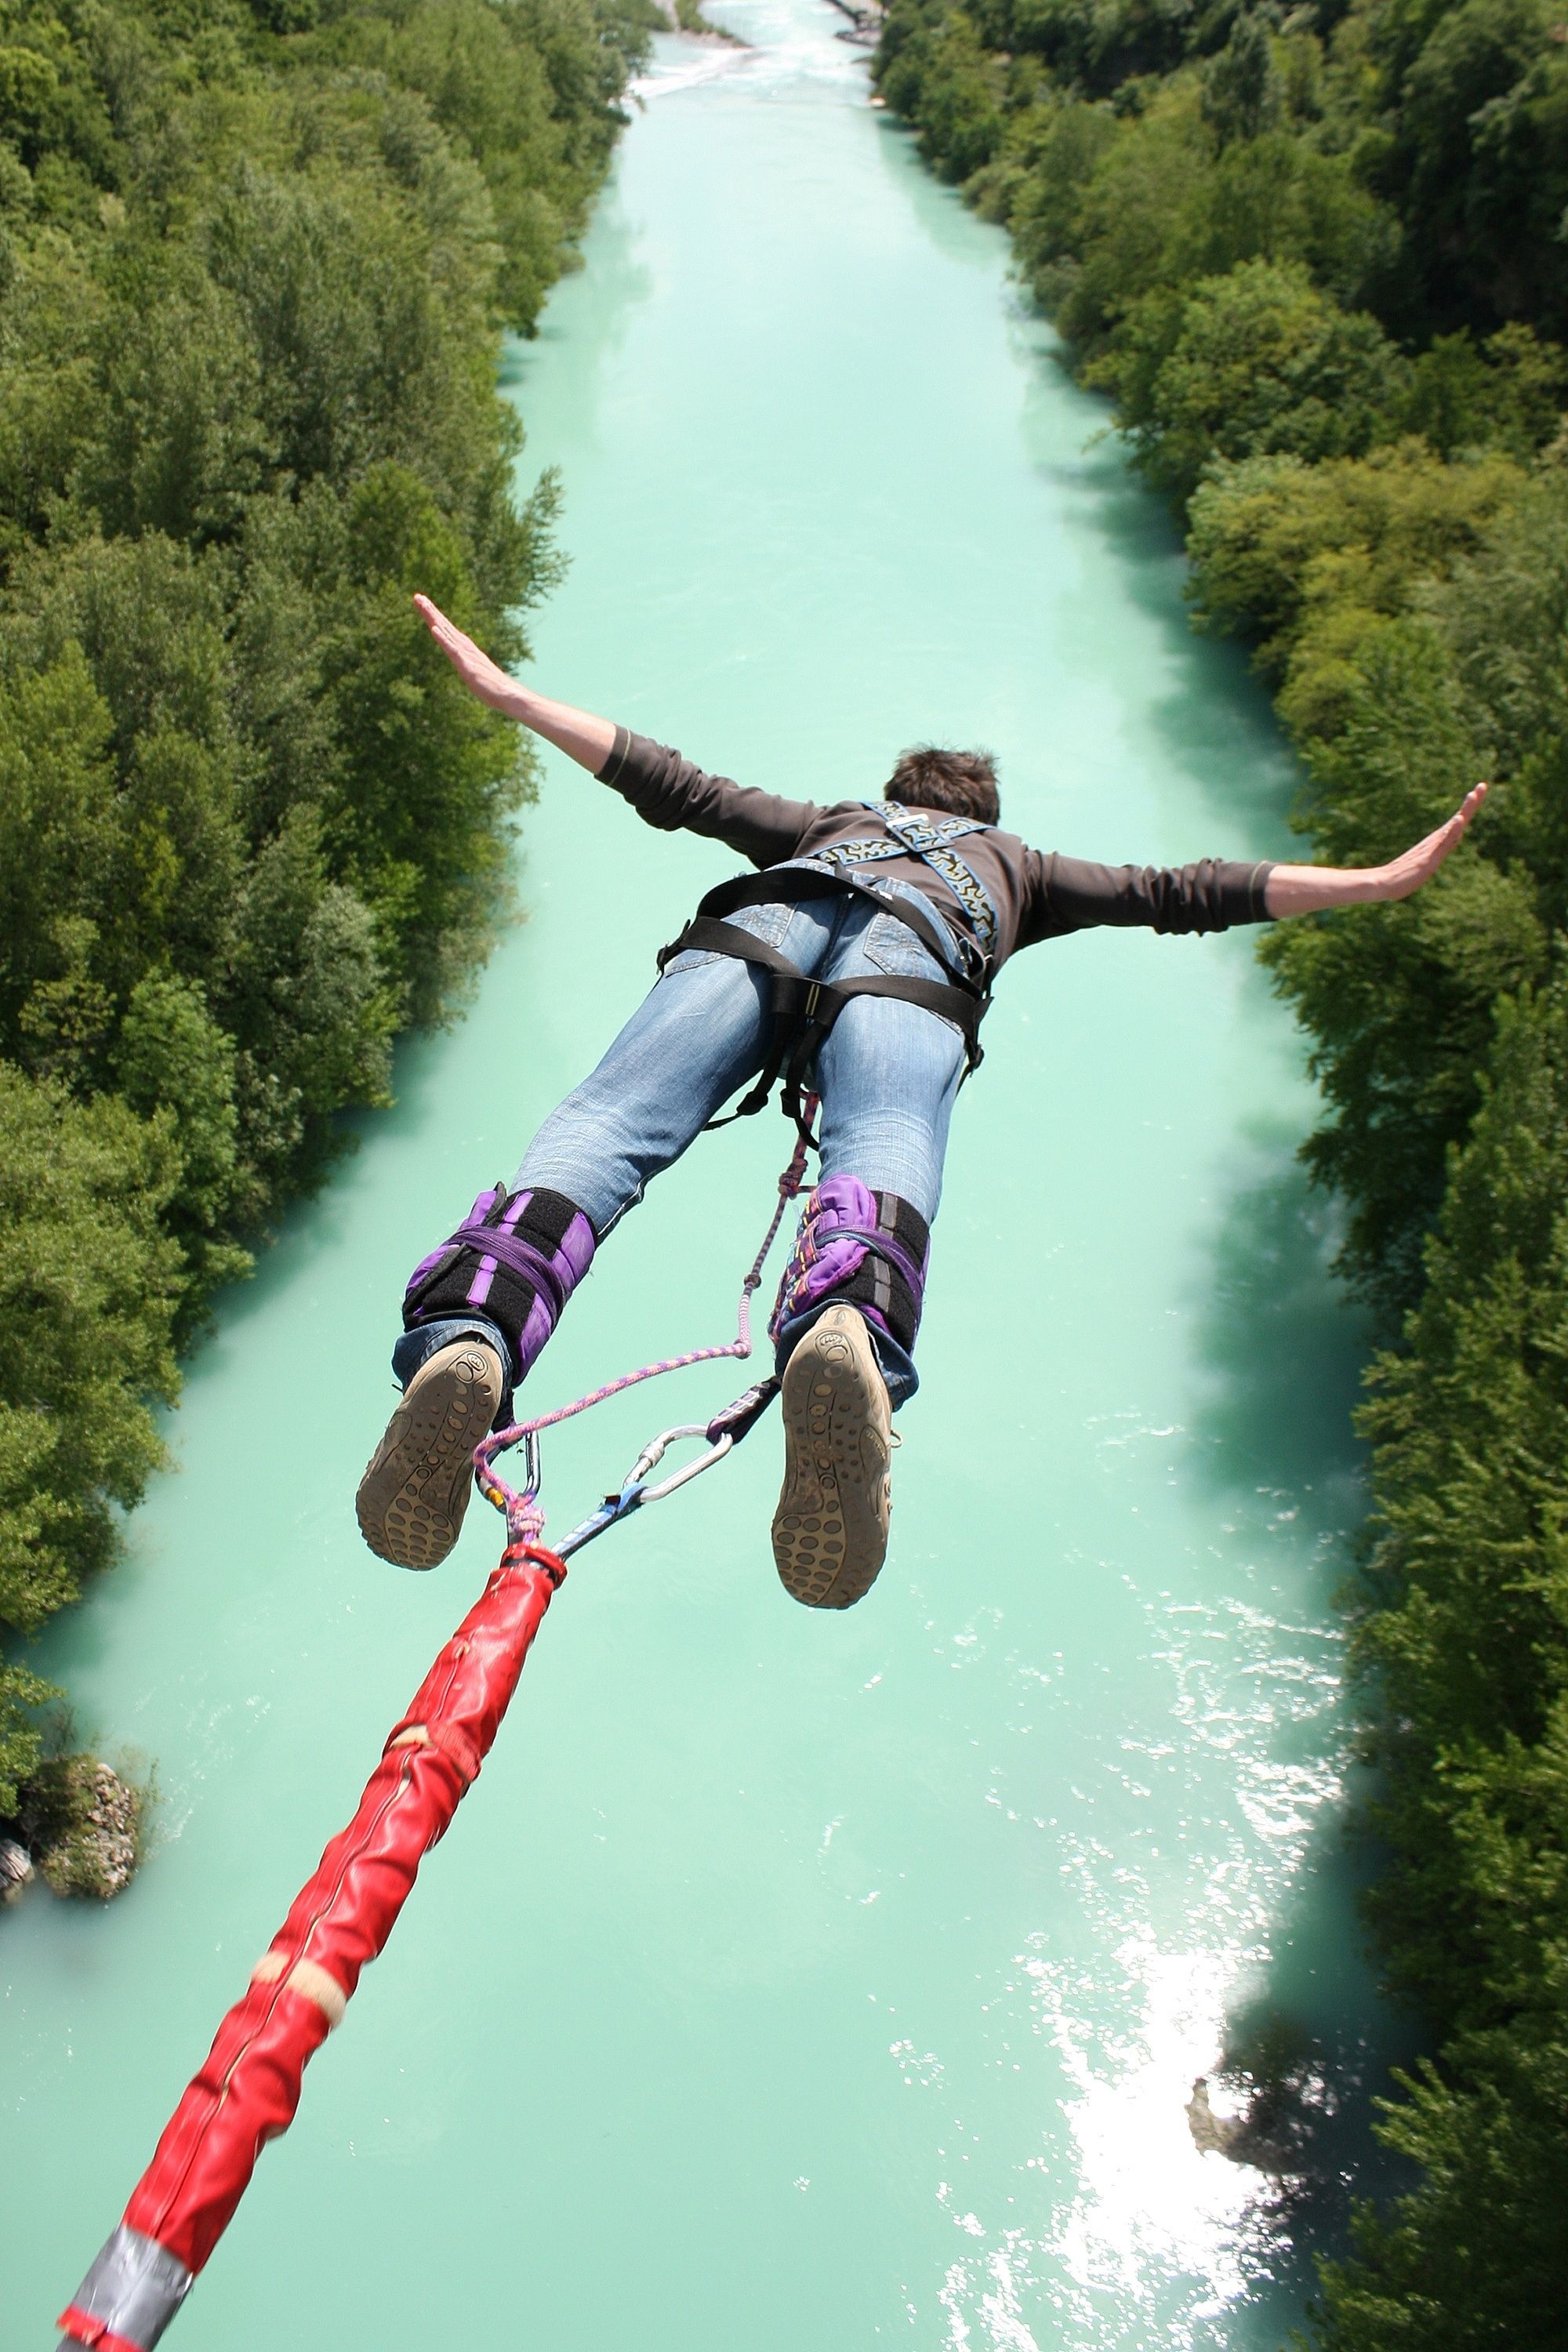 Bungee Jumping: Falling from a launching pad, A free-fall above the river, Extreme activity. 2000x3000 HD Wallpaper.